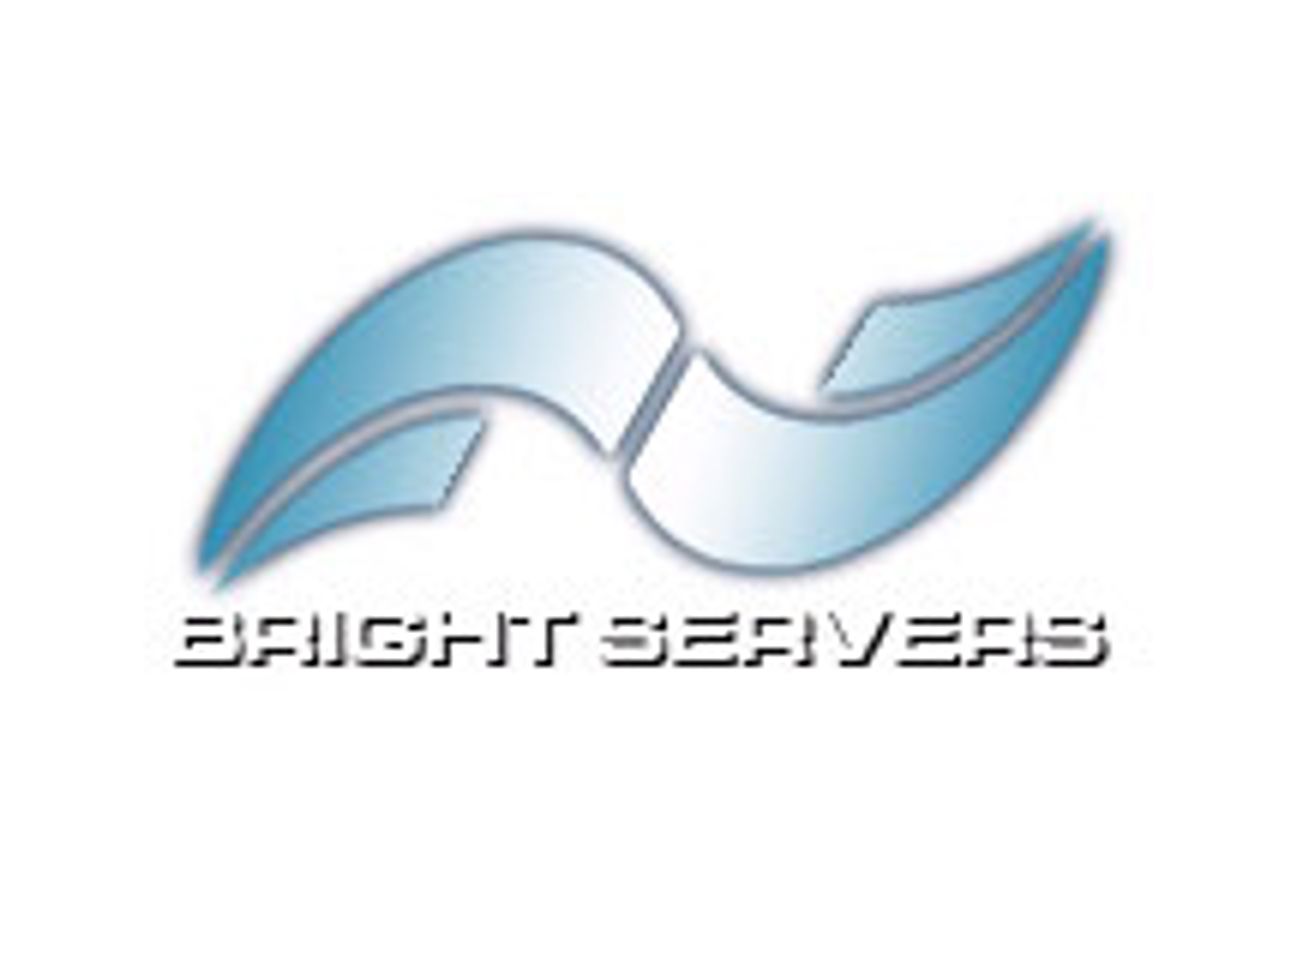 Bright Servers Go with Paysystems